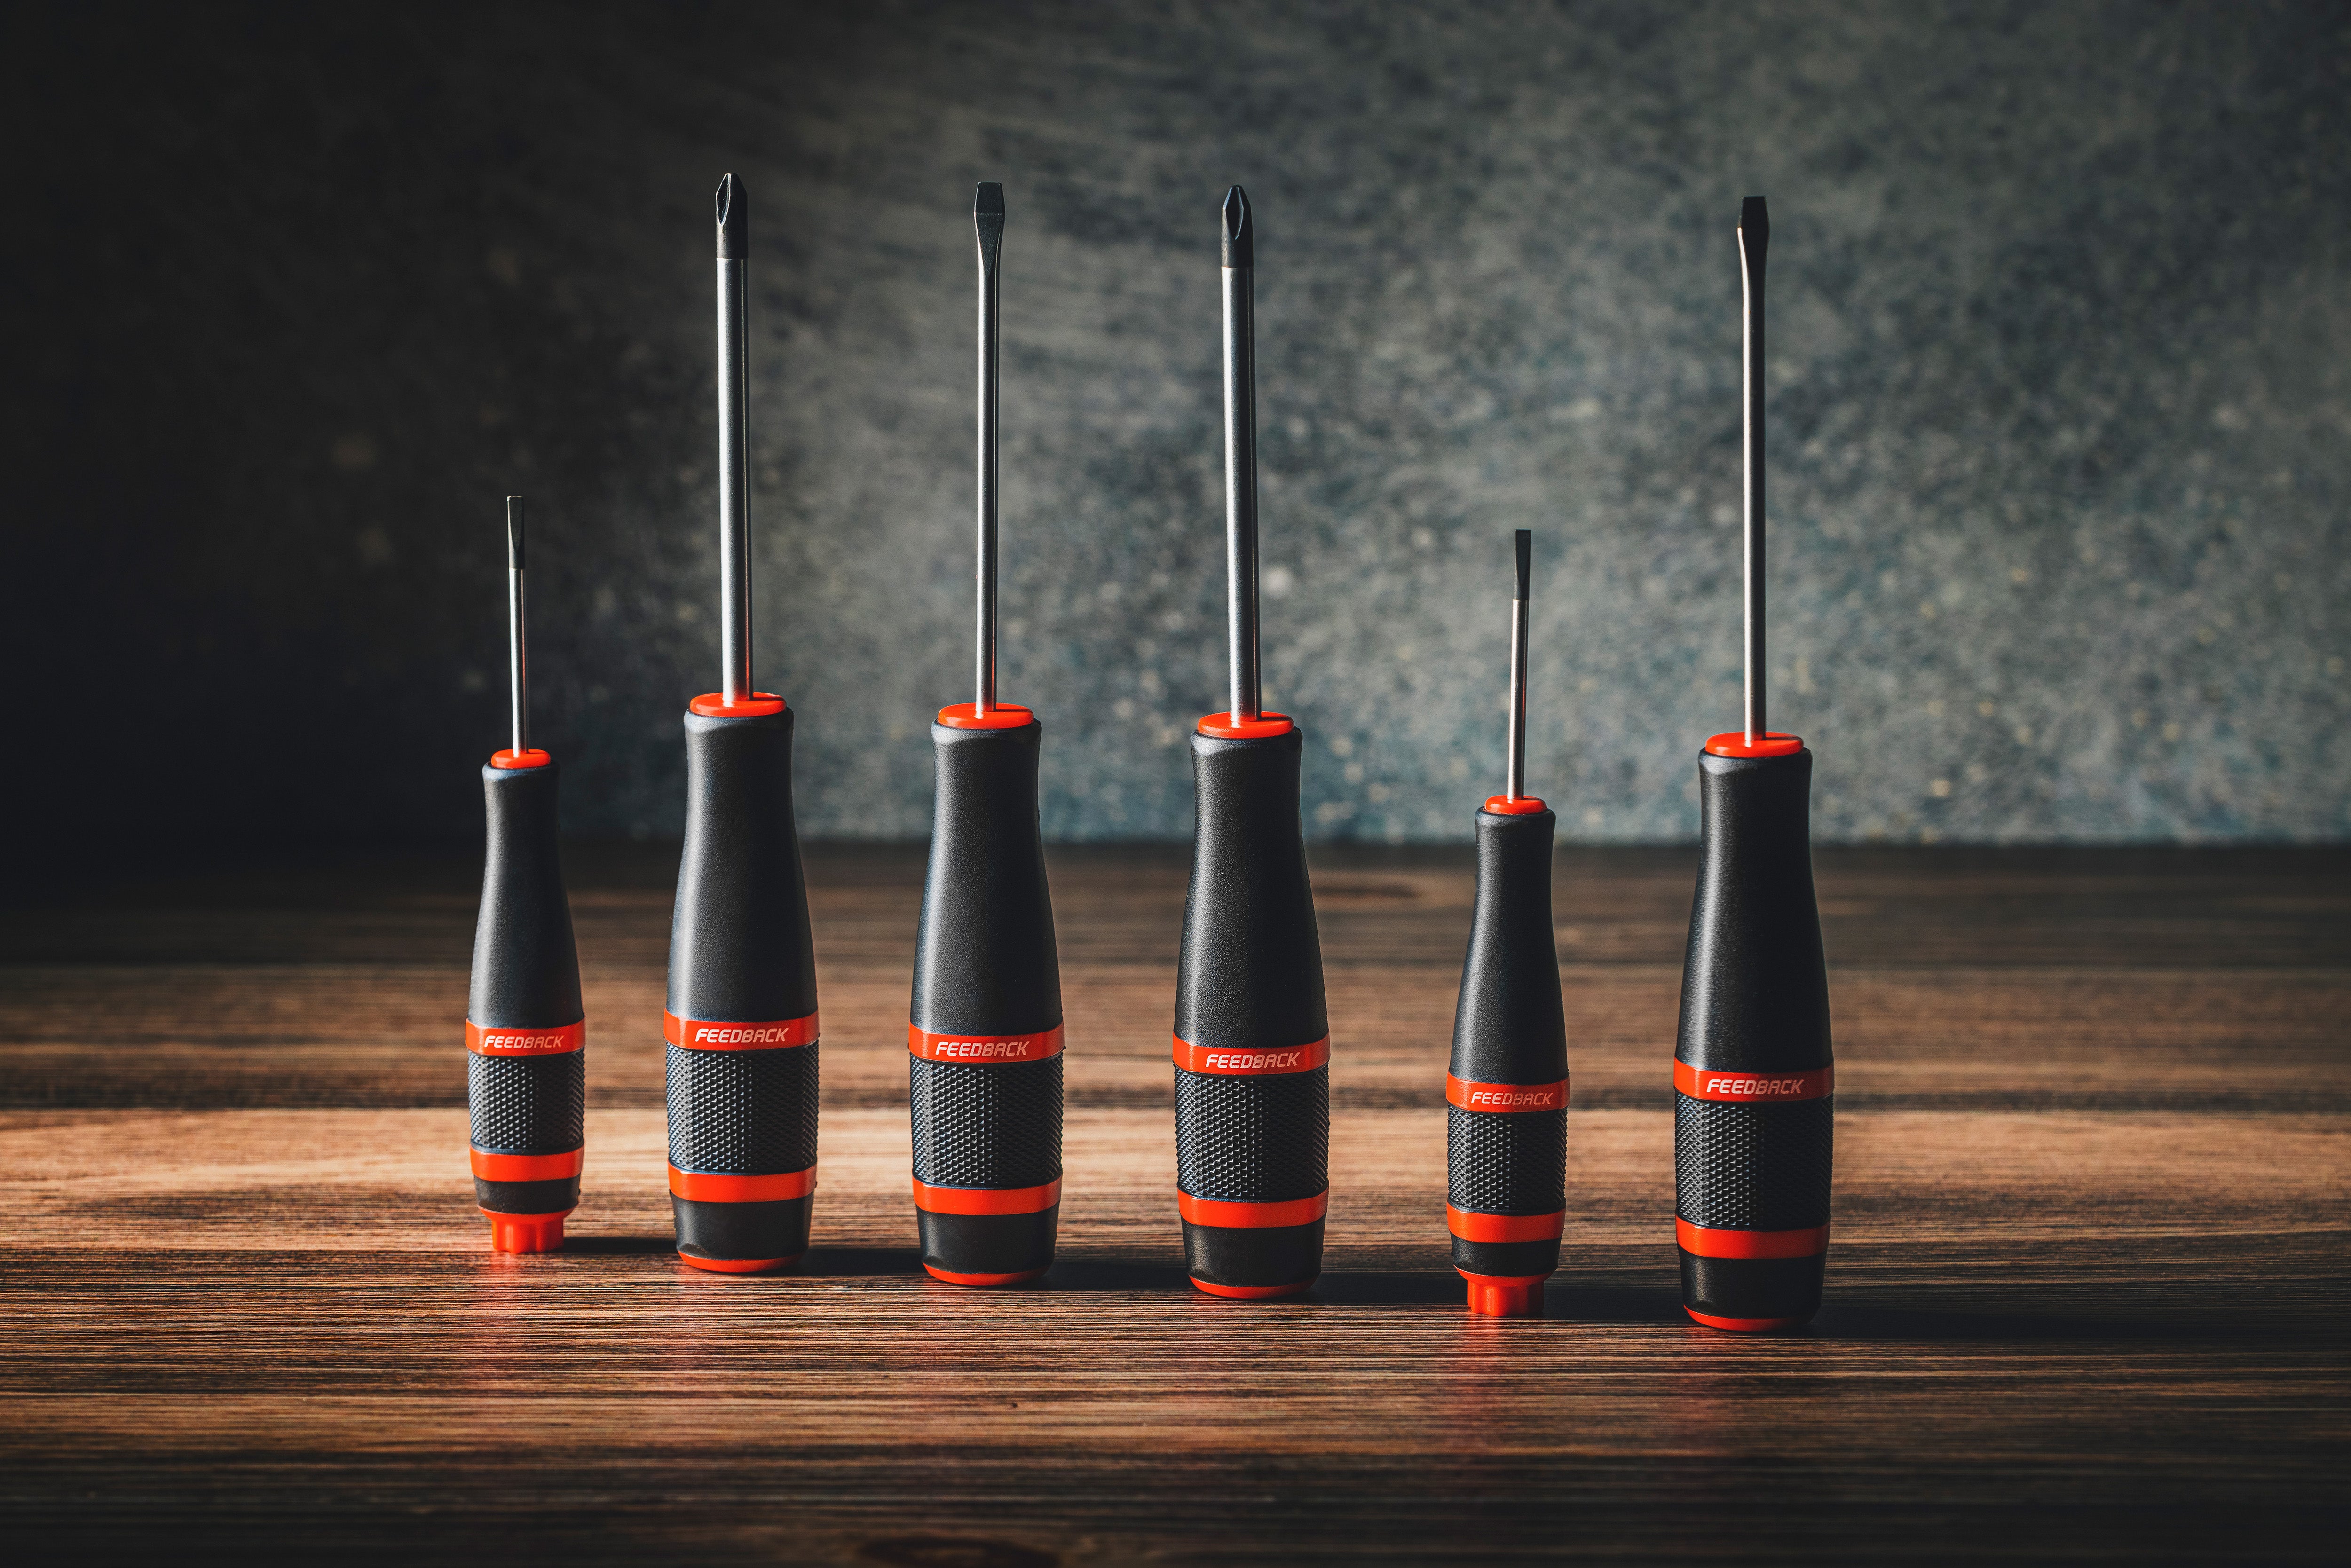 screwdrivers lined up on wood